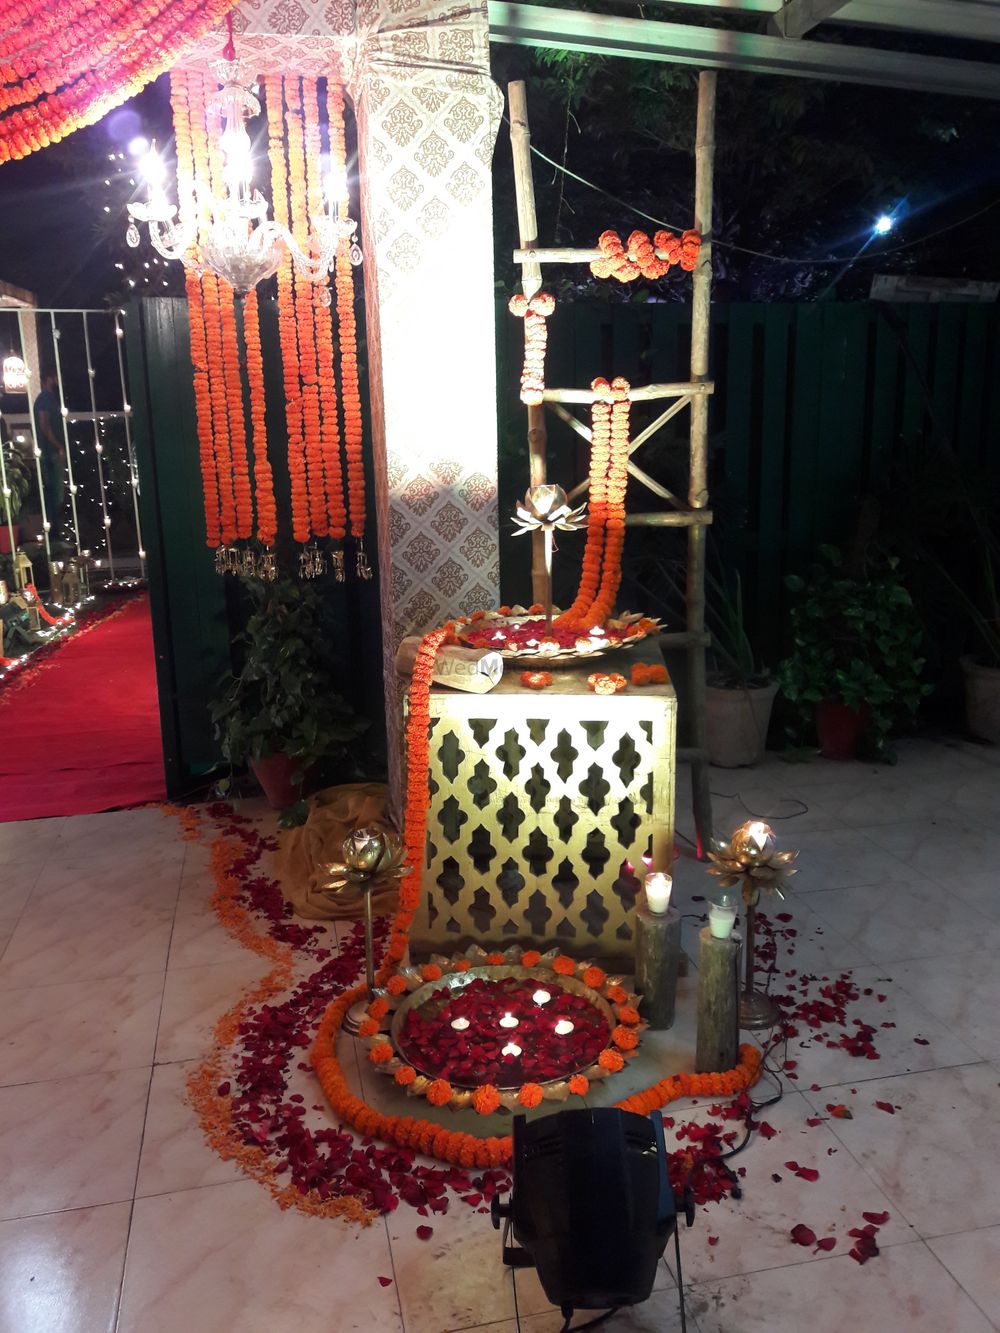 Photo From Festive Start- A Pre-Diwali Themed Party...  - By Strings & Knots Weddings And Events